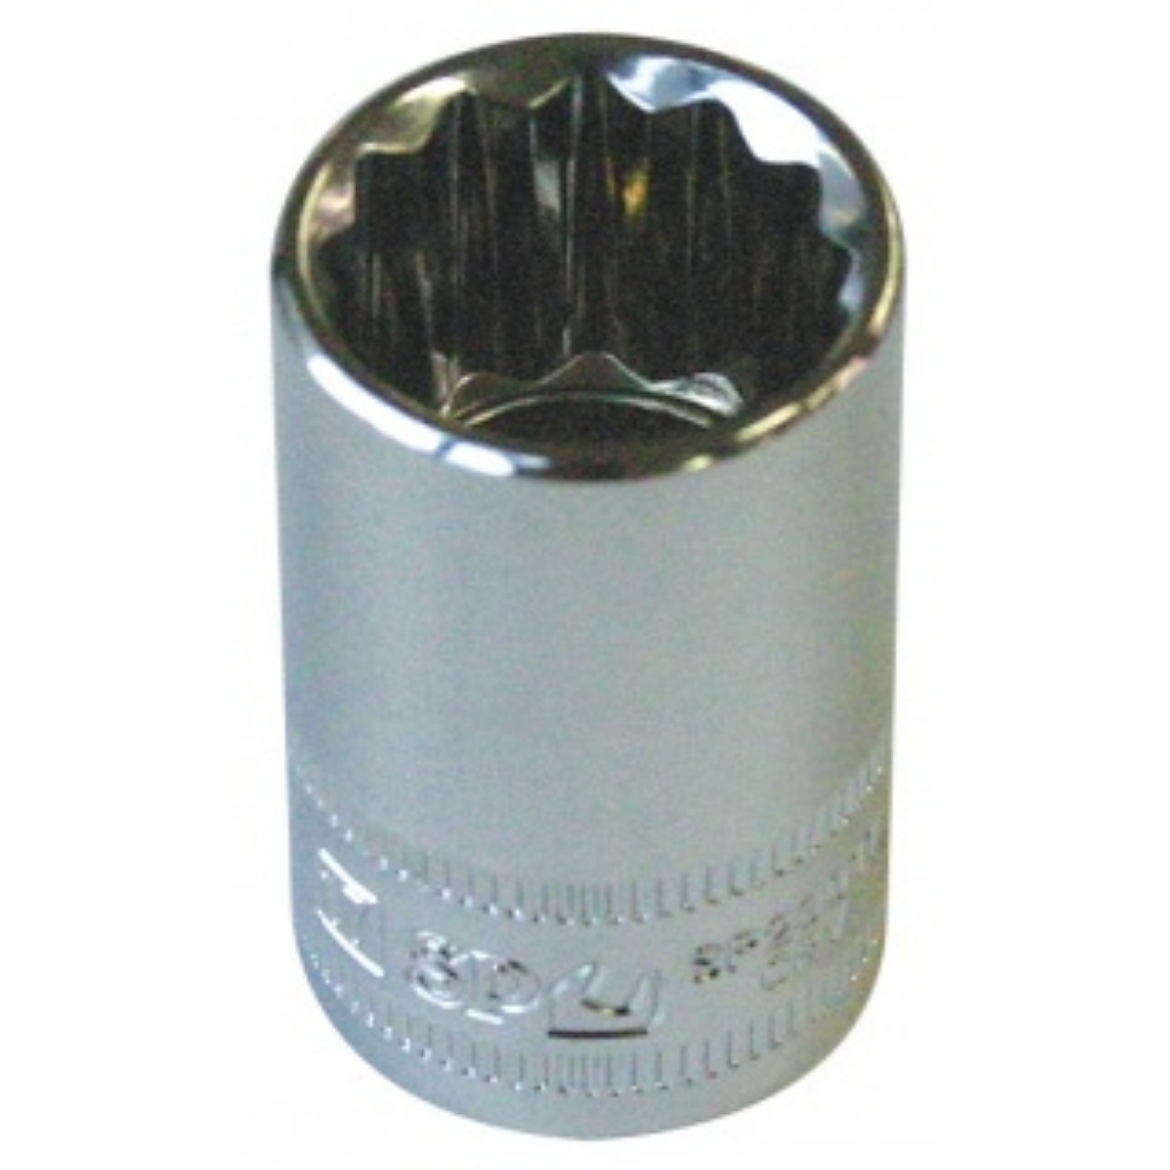 Picture of SOCKET 1/2"DR 12PT METRIC 12MM SP TOOLS